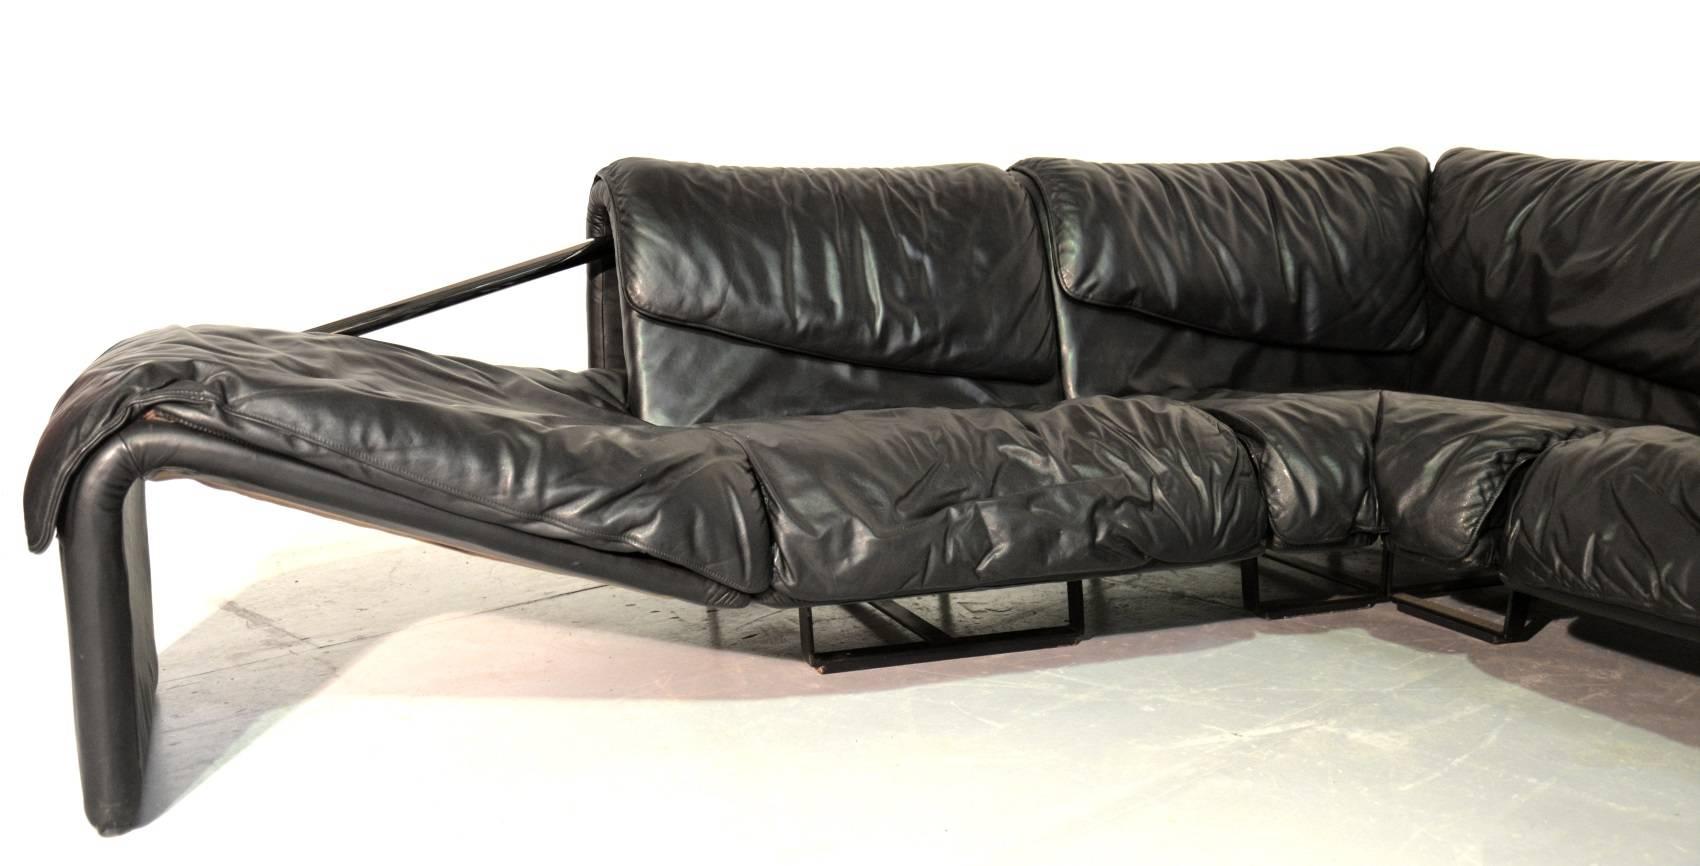 Late 20th Century Inmotion Leather Corner Sofa by De Sede of Switzerland, 1970s For Sale